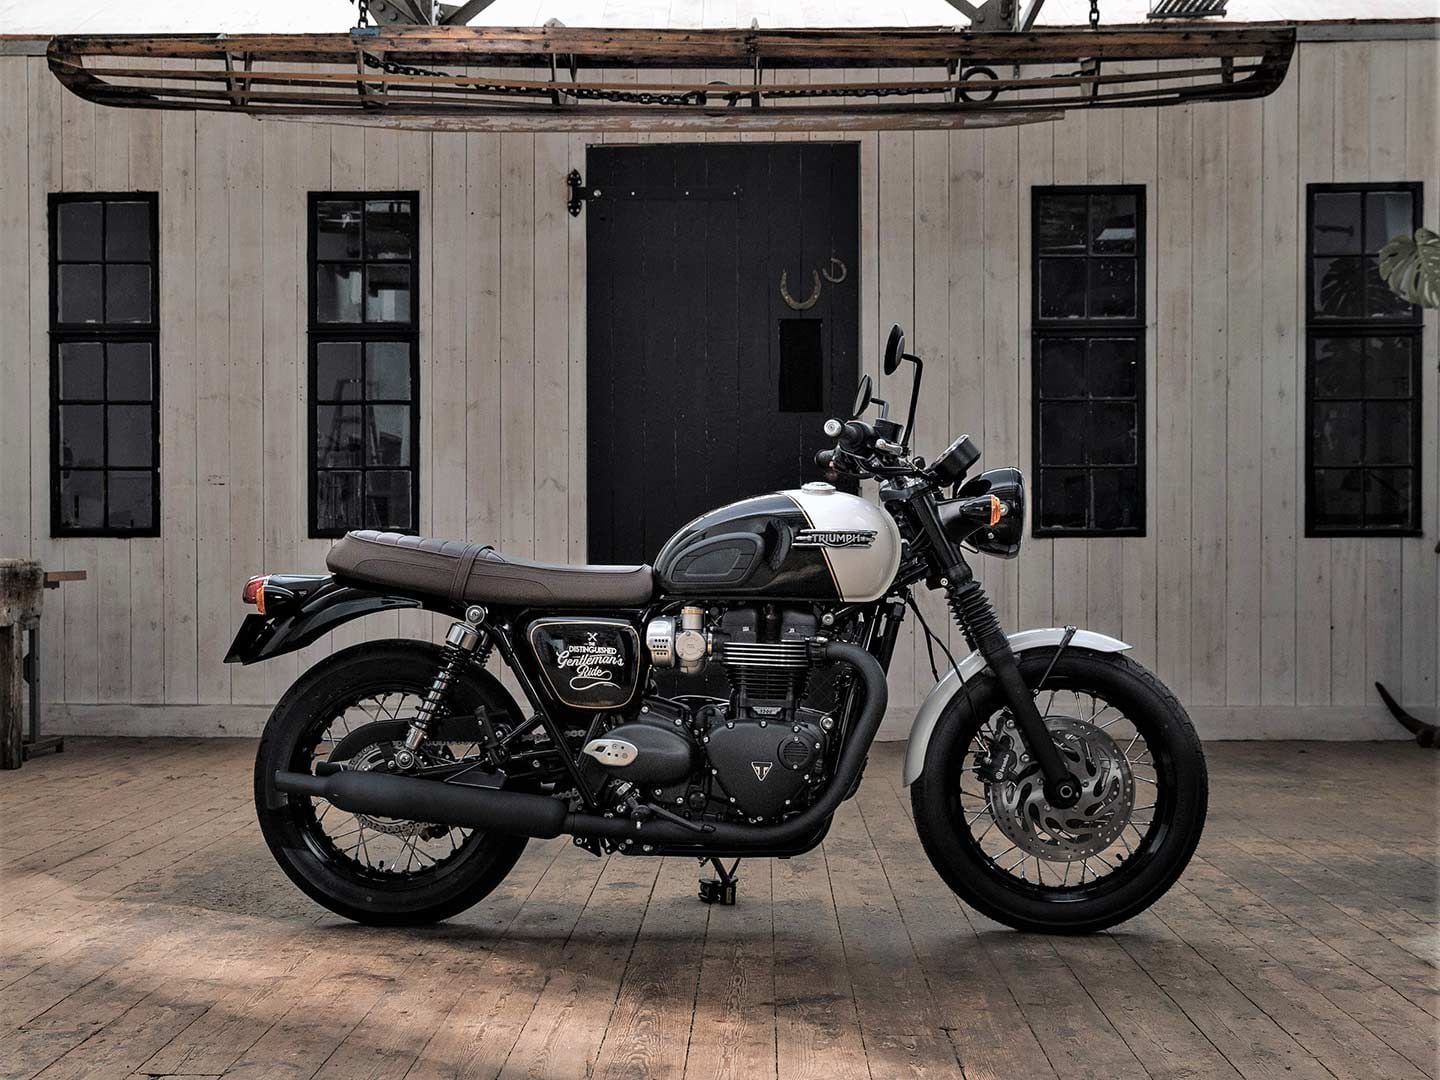 To celebrate the 10-year anniversary of its partnership with the Distinguished Gentleman's Ride, Triumph has unveiled the Bonneville T120 Black DGR Edition. The US will get just 50 units.